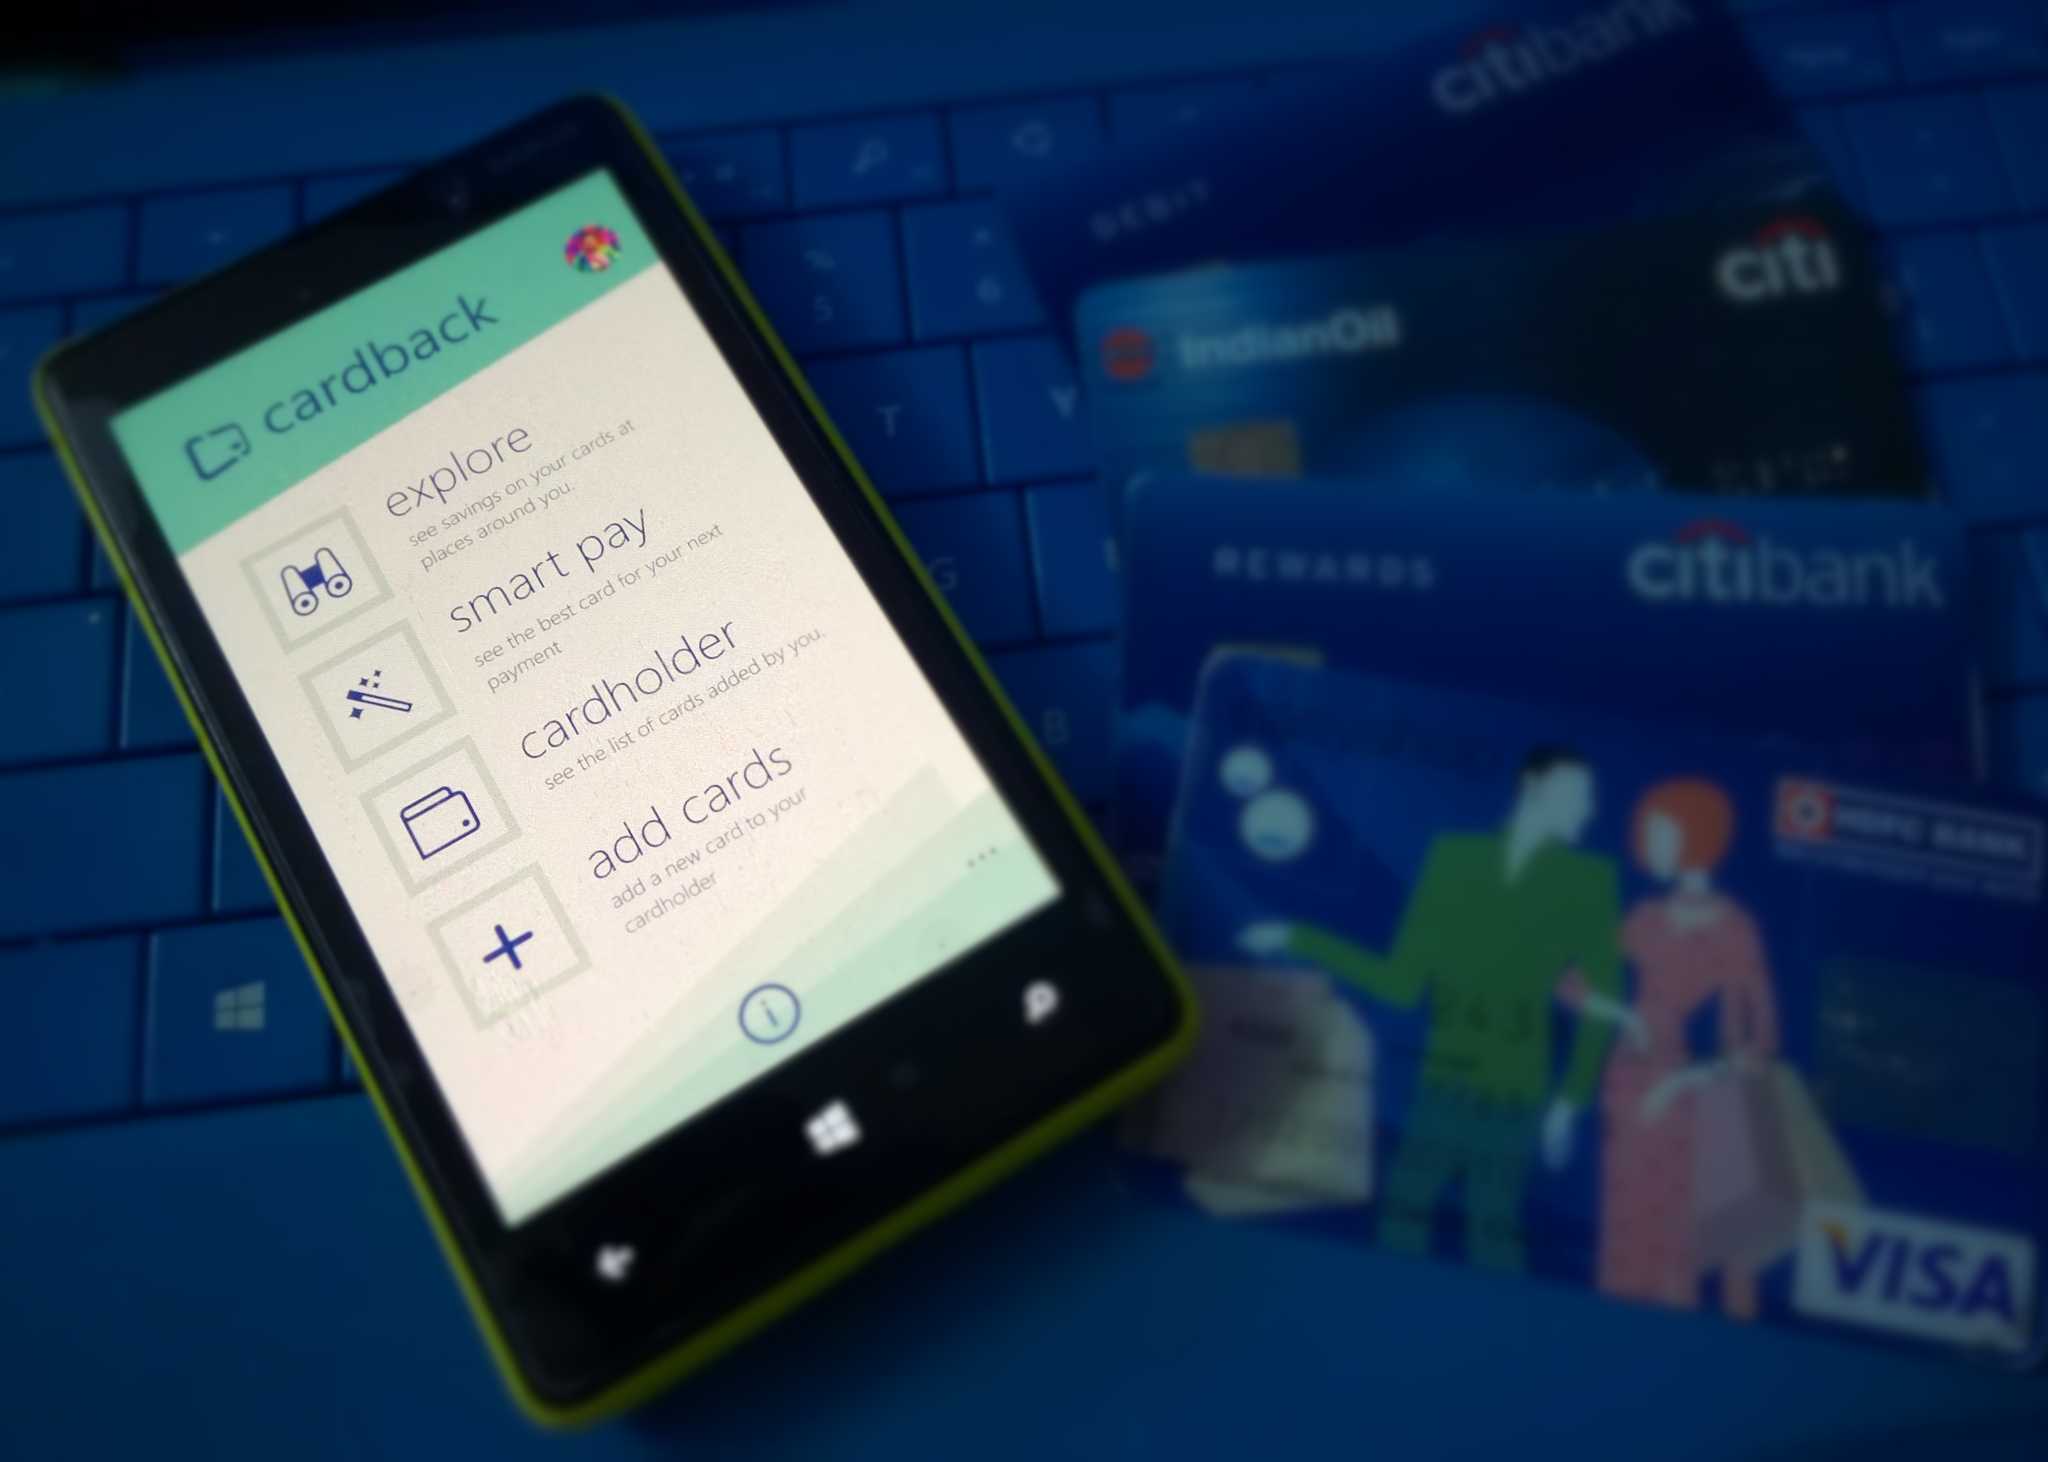 Cardback for Windows Phone helps users in India maximize credit card benefits | Windows Central